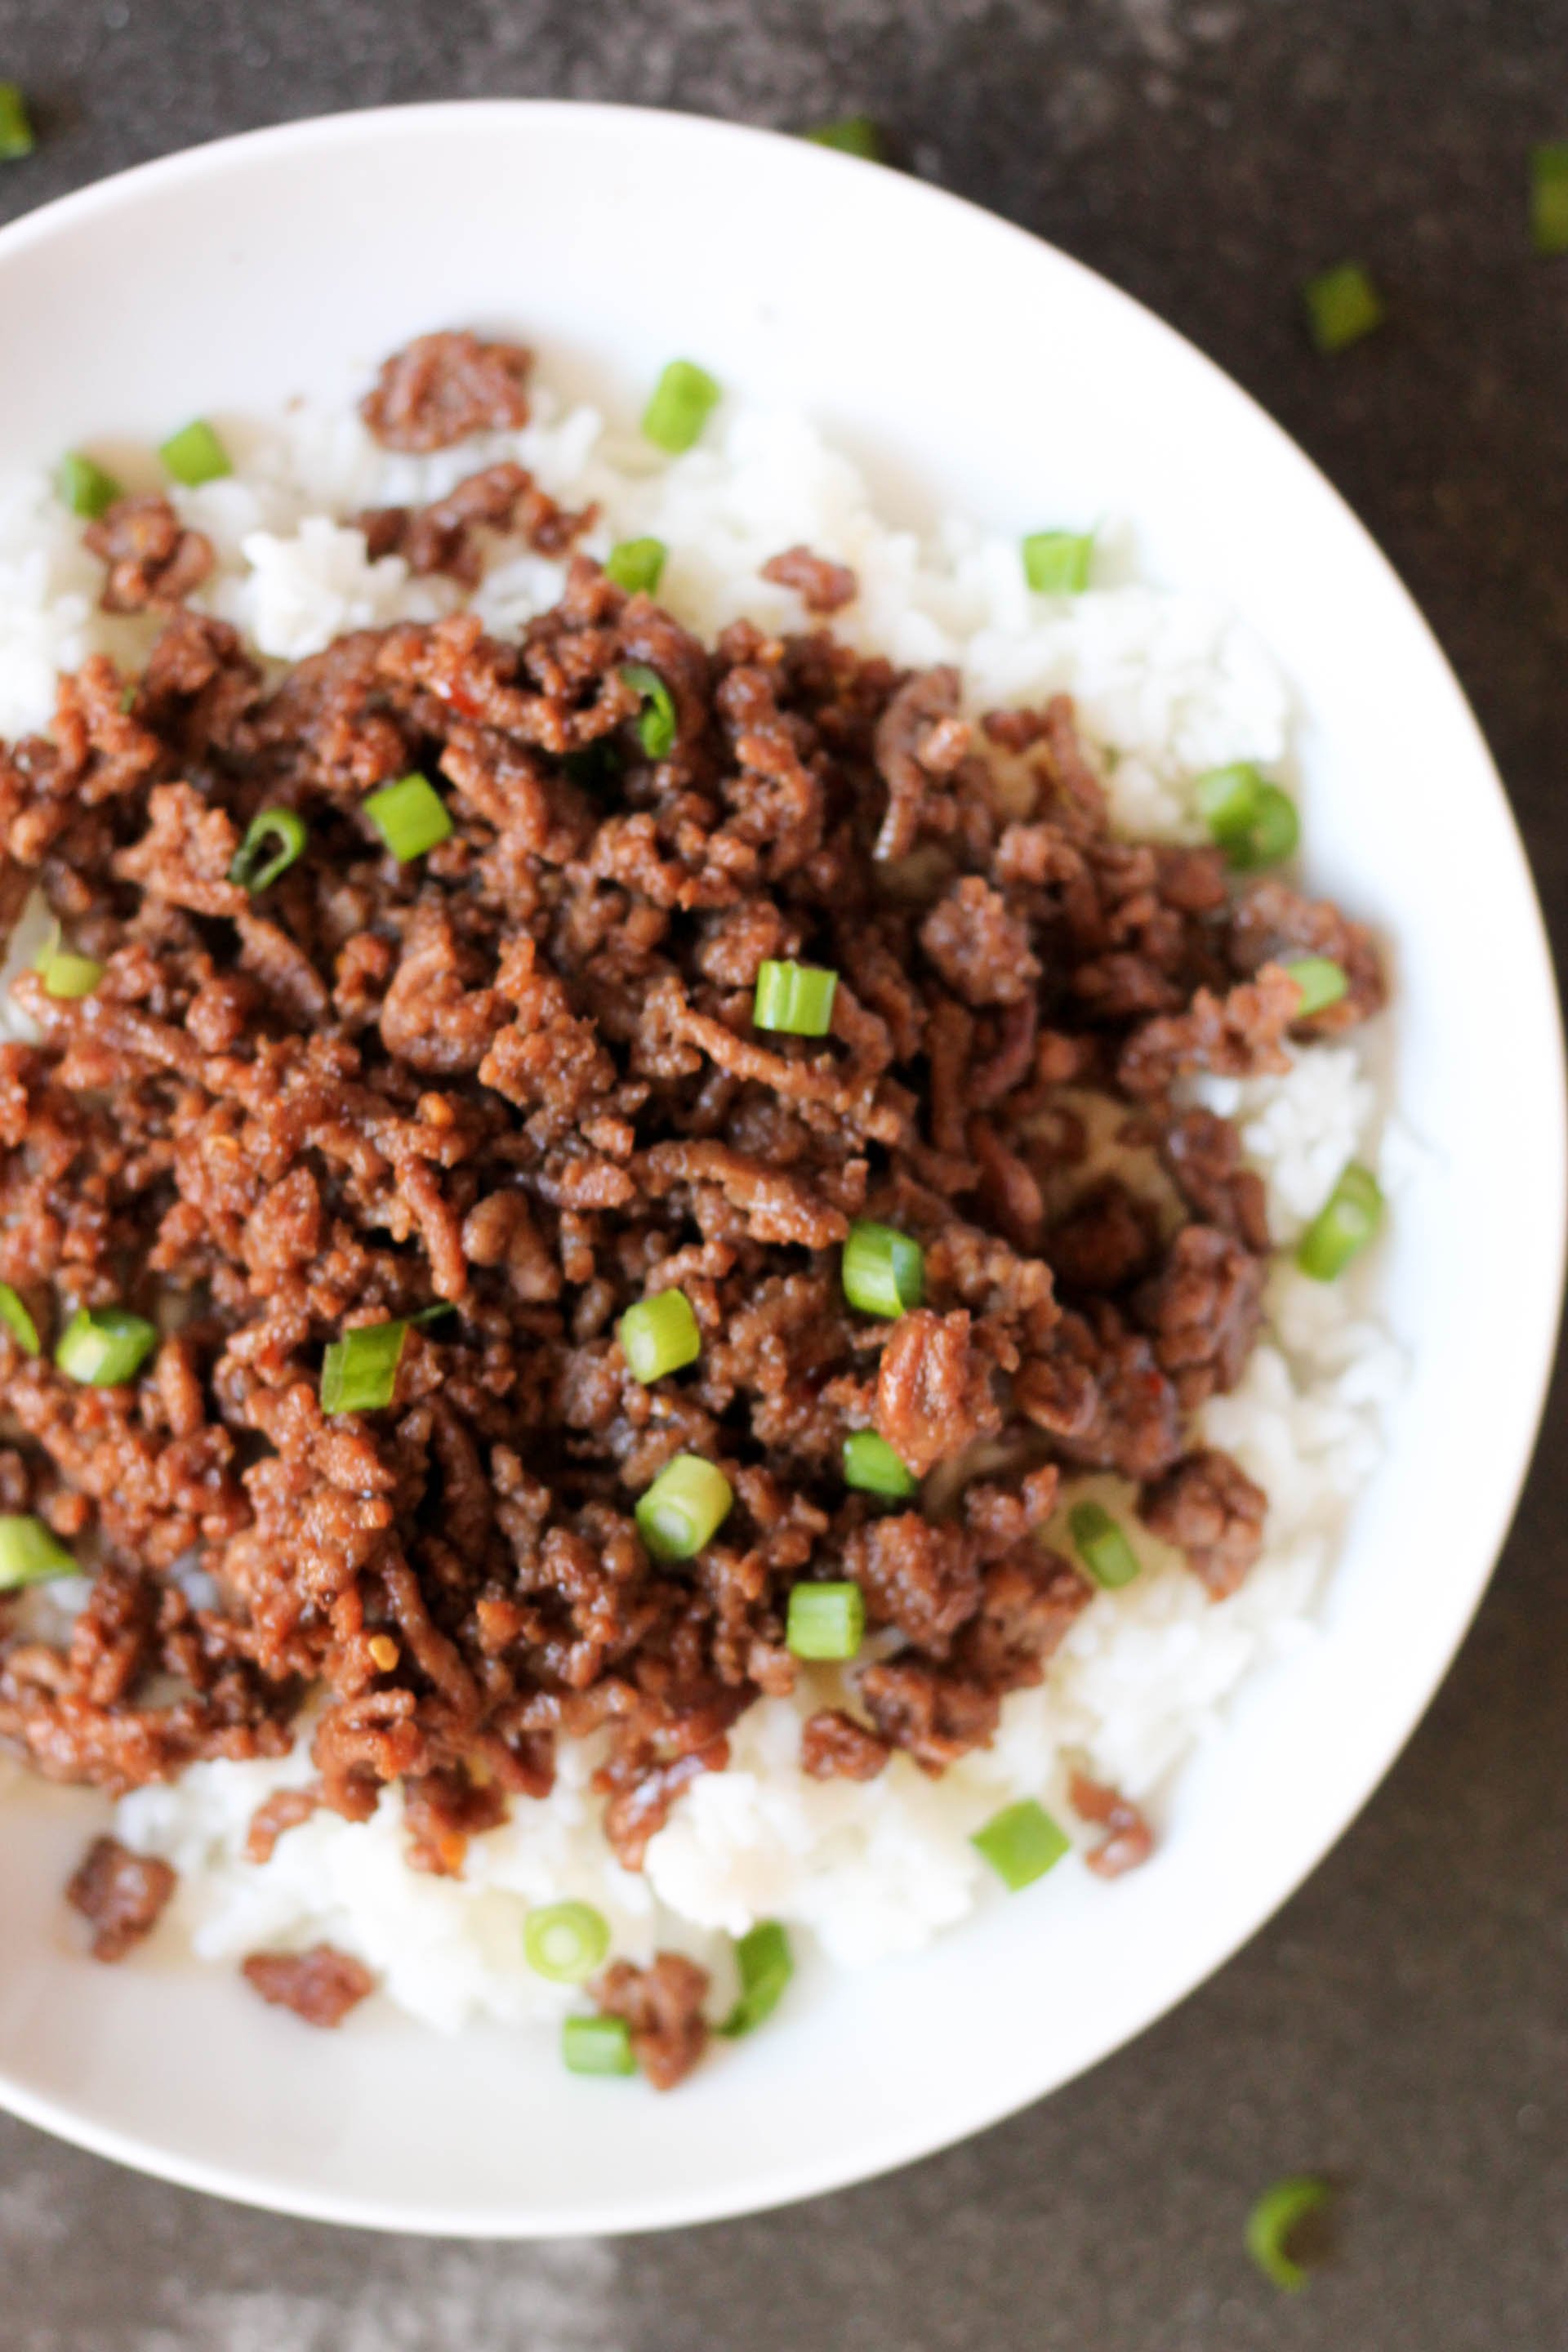 Korean Beef and Rice